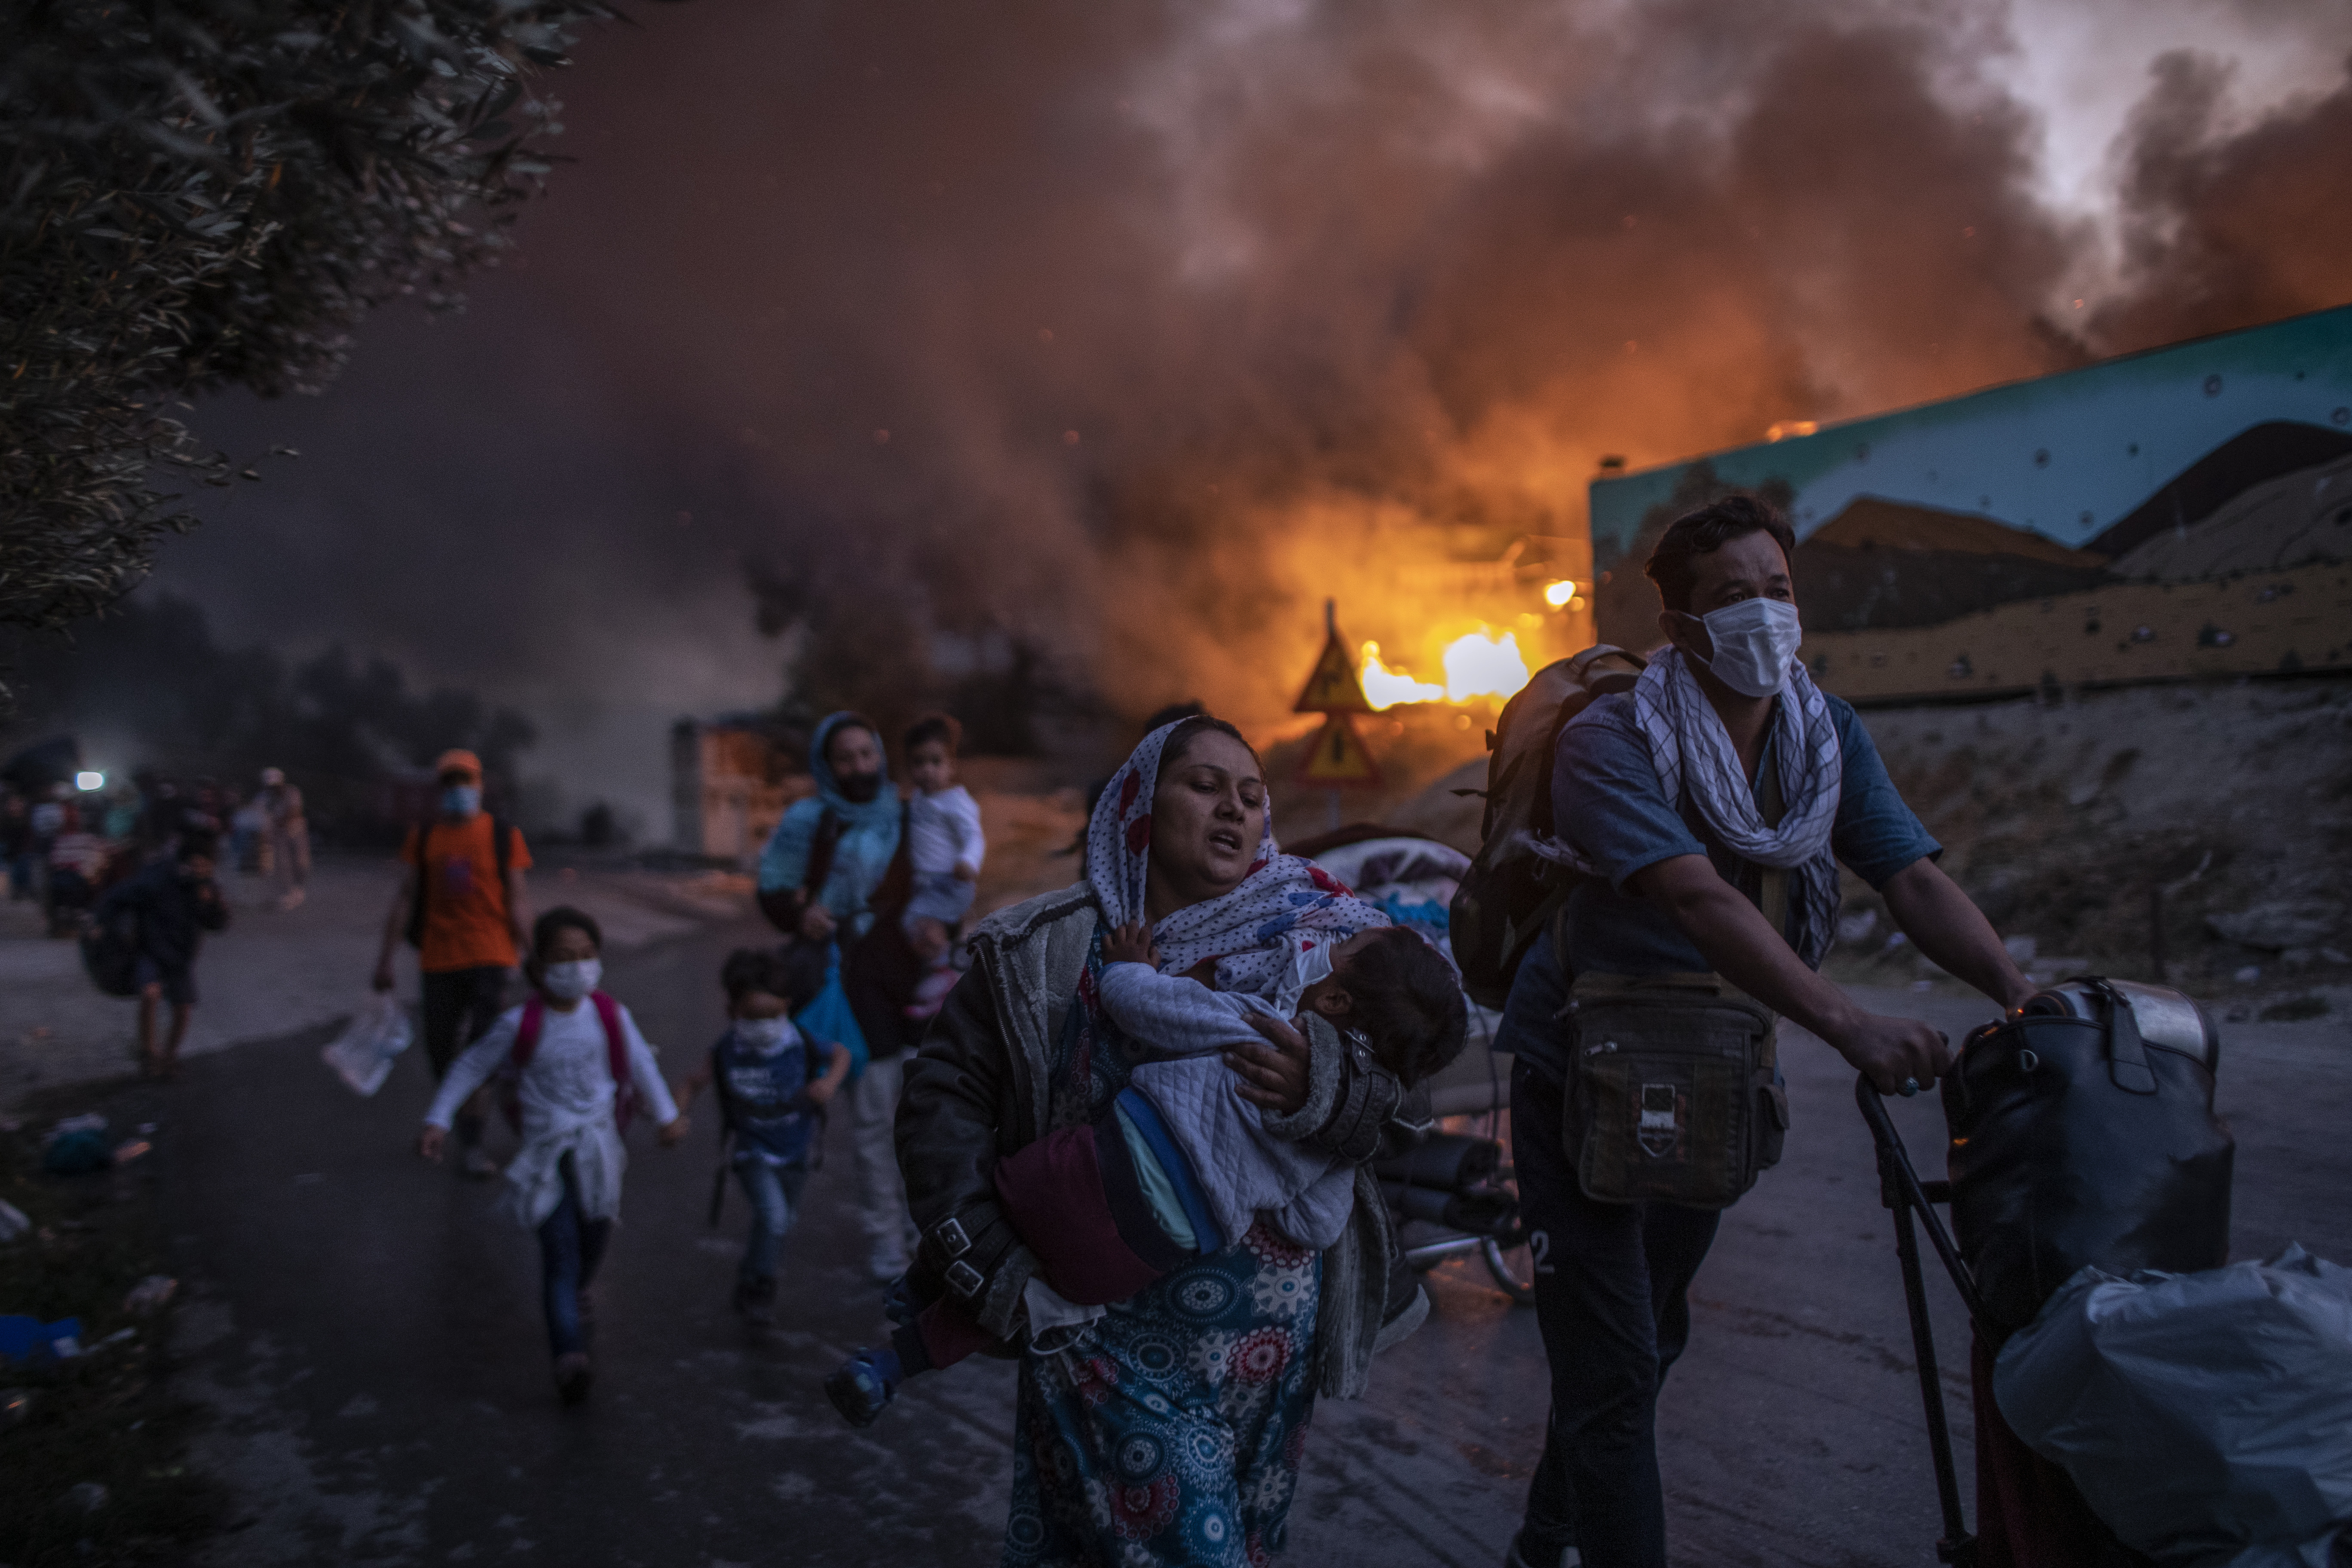 Refugees and migrants carrying their belongings flee a fire burning at the Moria camp on Lesbos island, Greece, Wednesday, Sept. 9, 2020. Moria refugee camp was never far from crisis. Created in the wake of a massive influx of migrants five years ago, Greece's largest refugee facility quickly exceeded capacity, spilling into surrounding olive groves on the island of Lesbos. The camp's life ended as it began, in drama: Successive fires that started before dawn on Sept. 9 devastating the site and making 12,000 inhabitants homeless during a COVD-19 lockdown. (AP Photo/Petros Giannakouris)